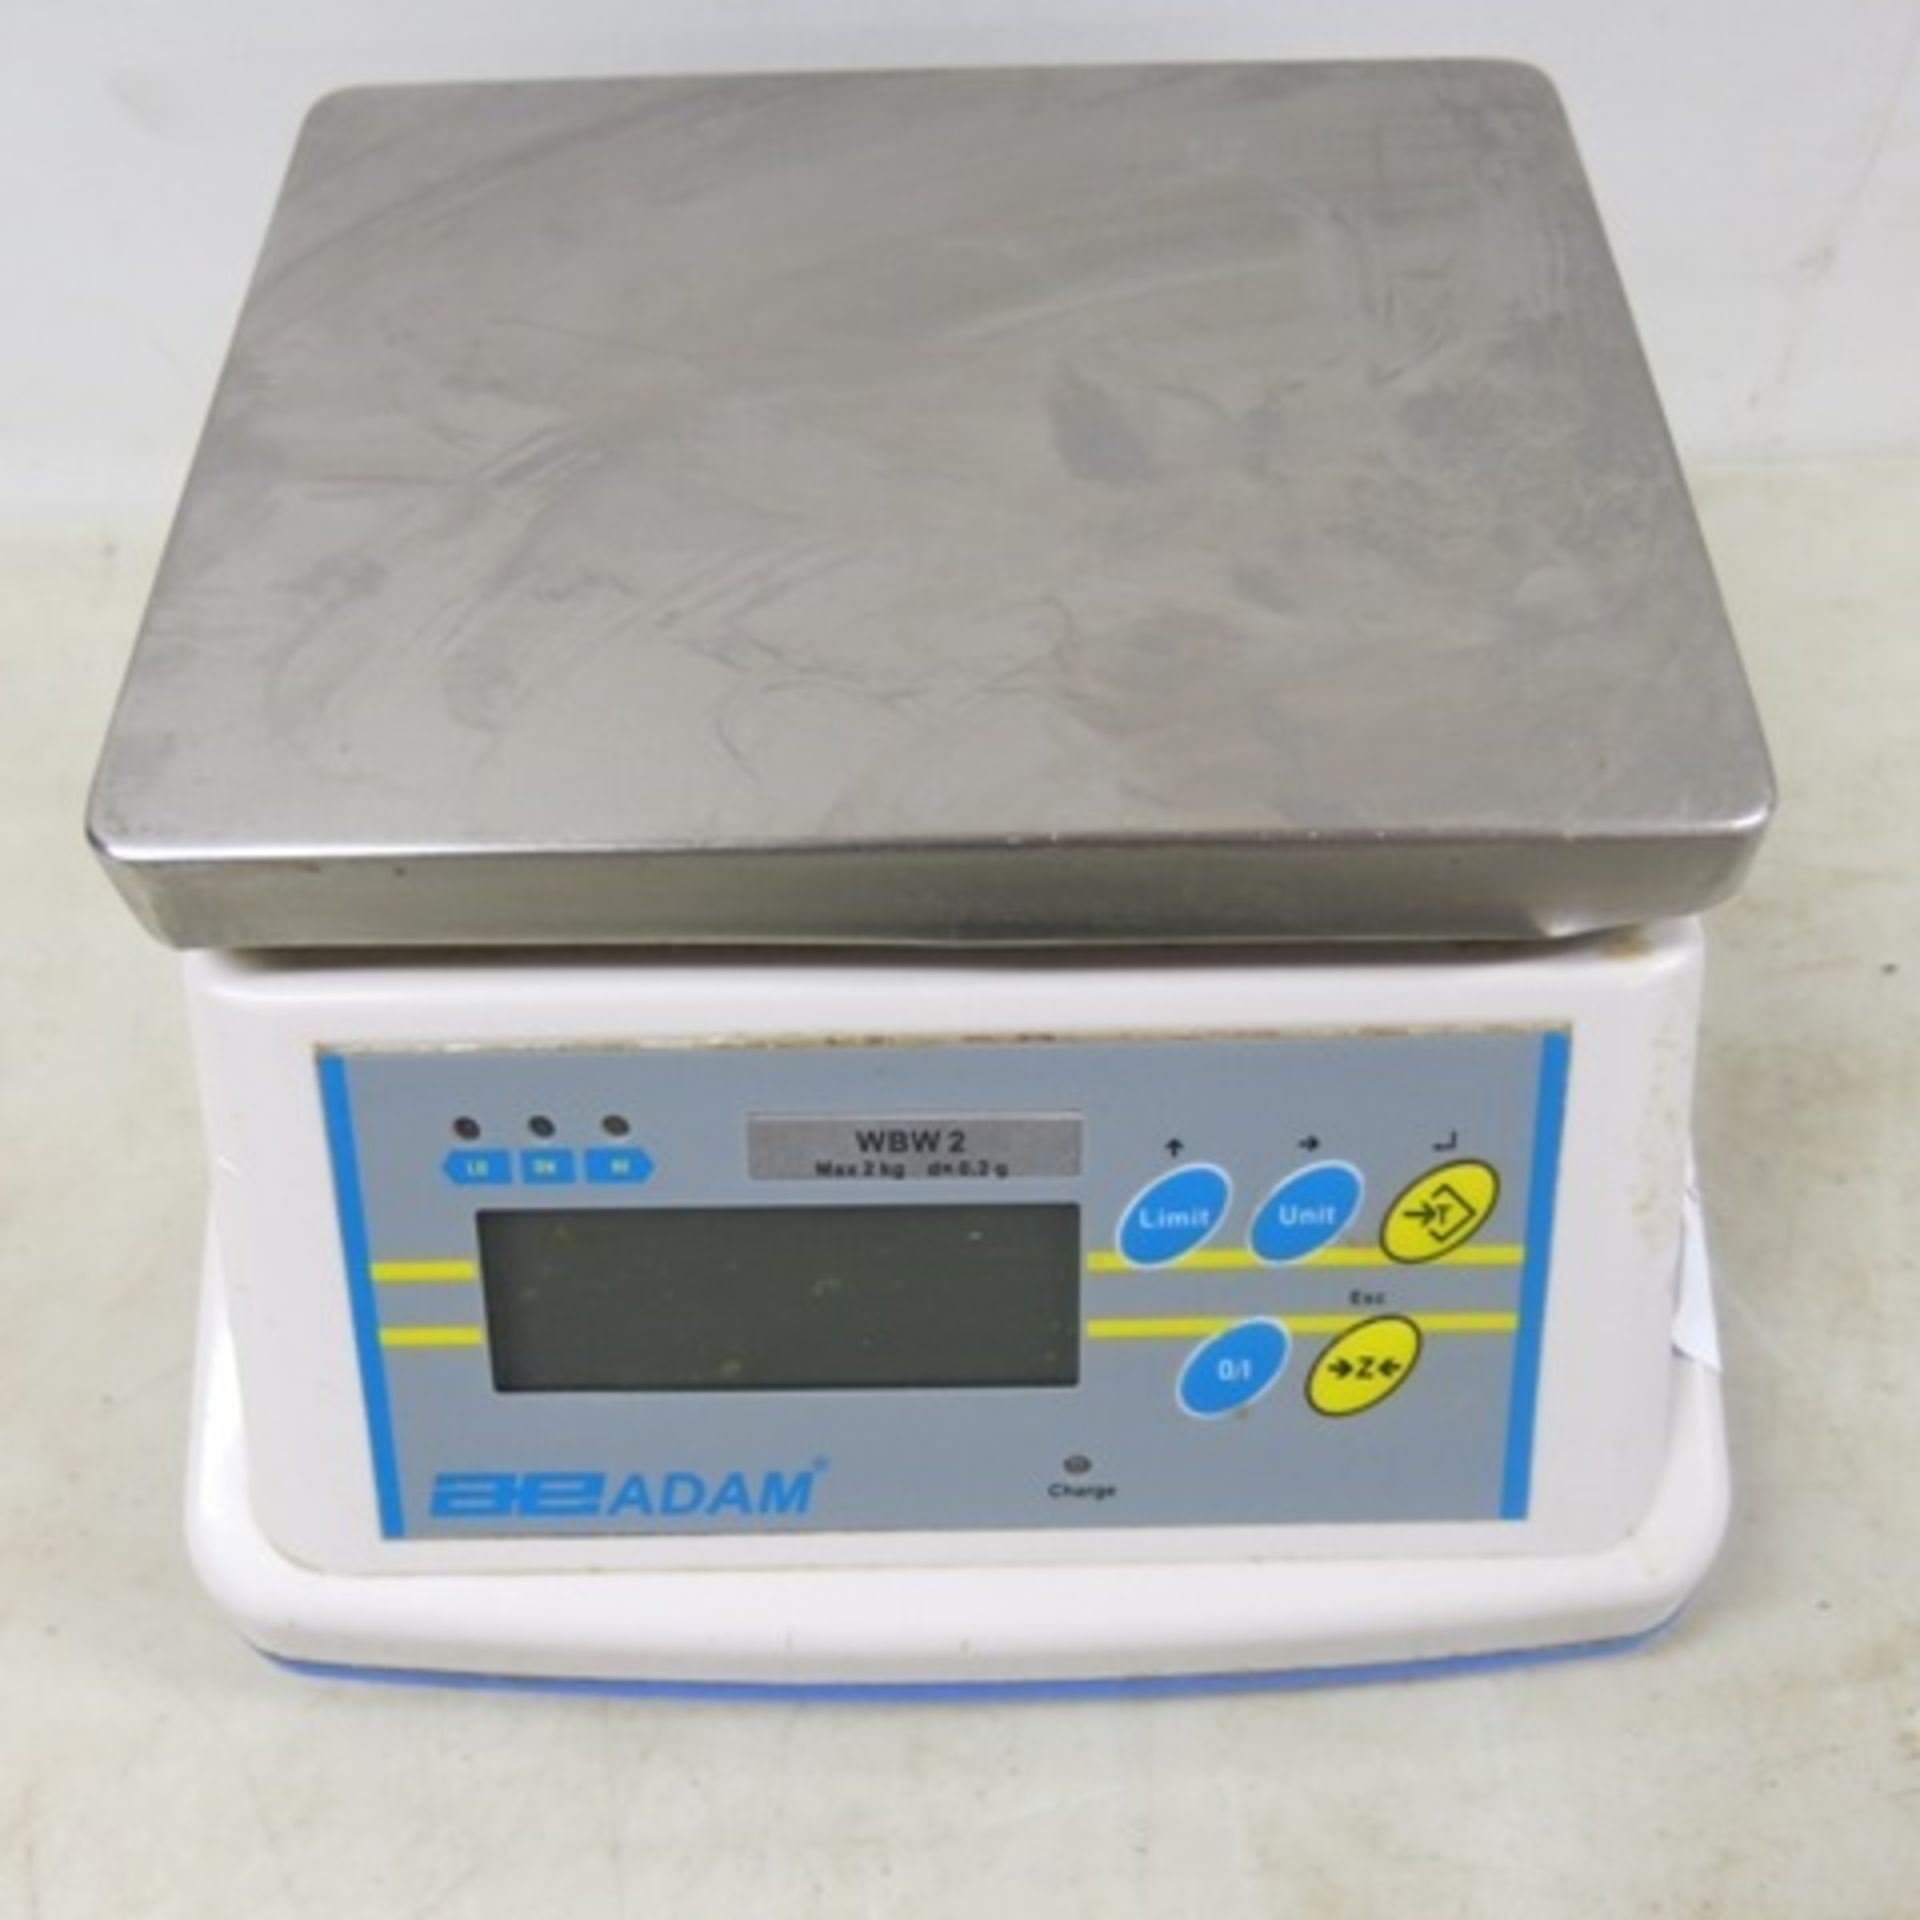 Adam WBW 2 Retail Scales Up to 2kg Capacity.